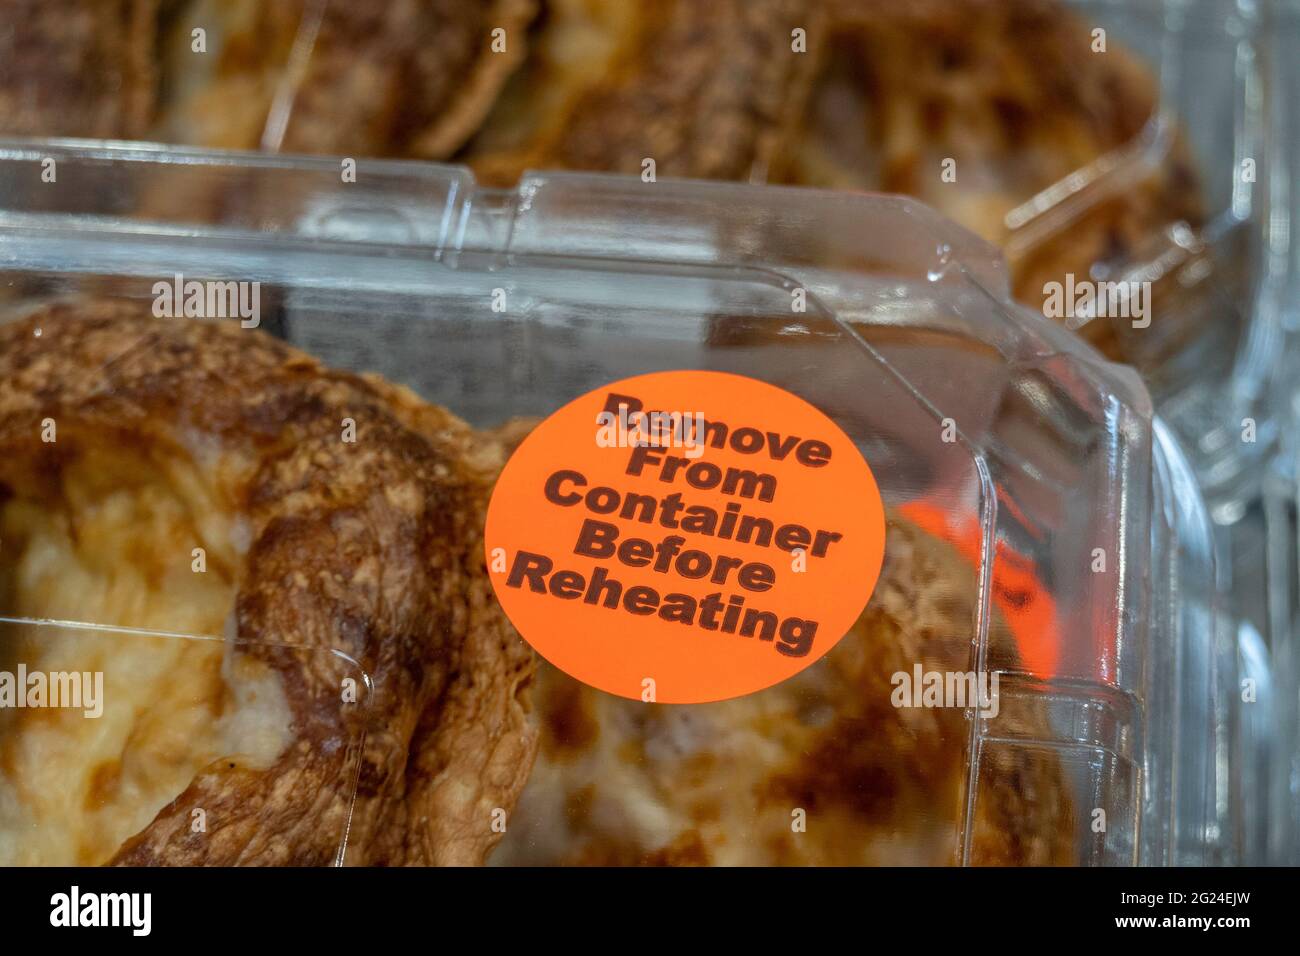 Remove from Container Before Reheating Sticker on baked Goods, USA Stock Photo